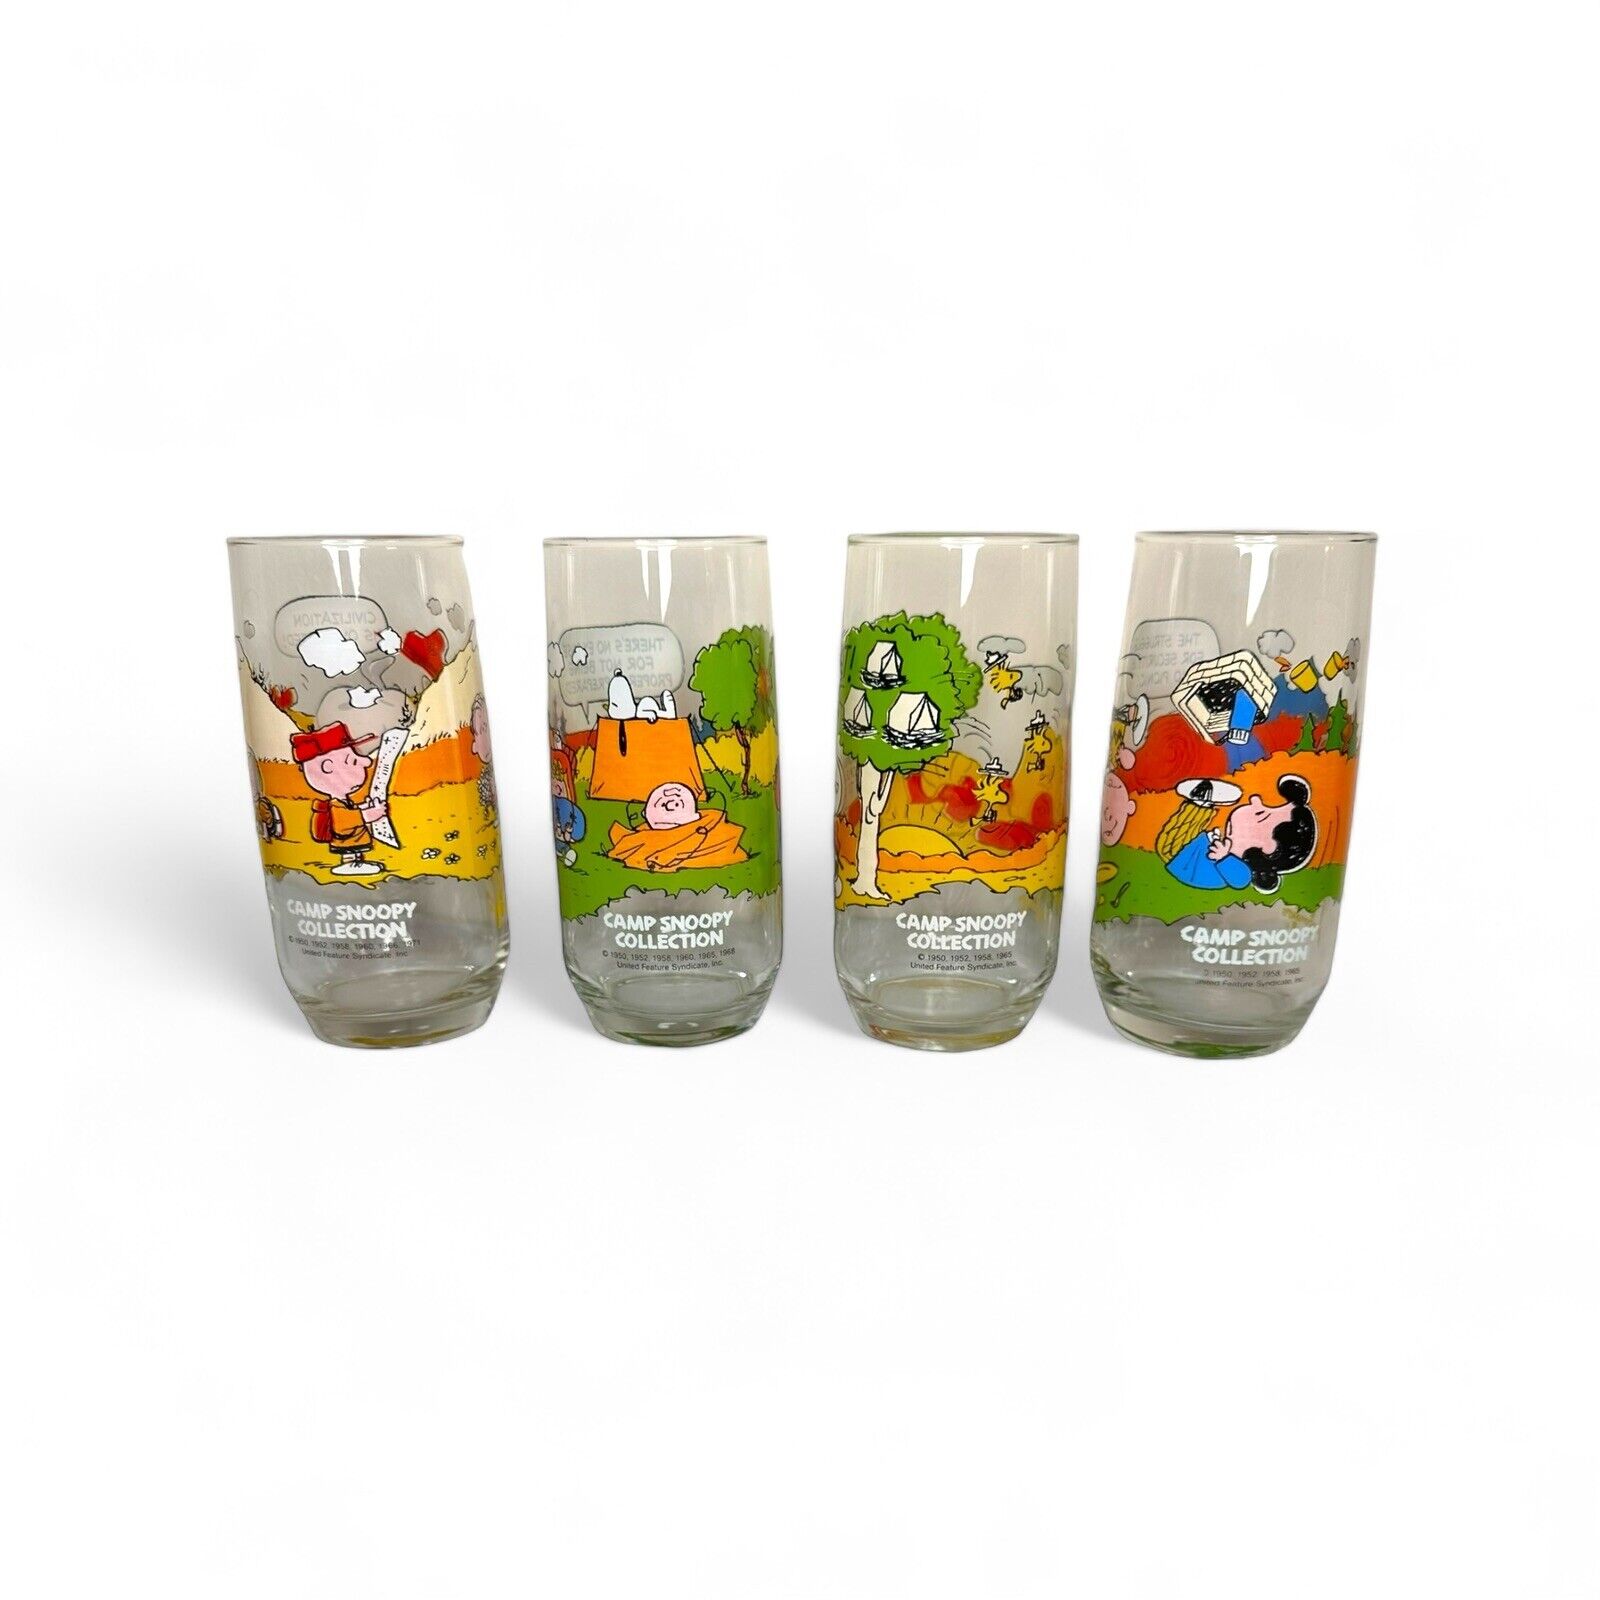 Vintage Peanuts McDonald’s Camp Snoopy Collection Glasses Set of 4 Vintage 1960s